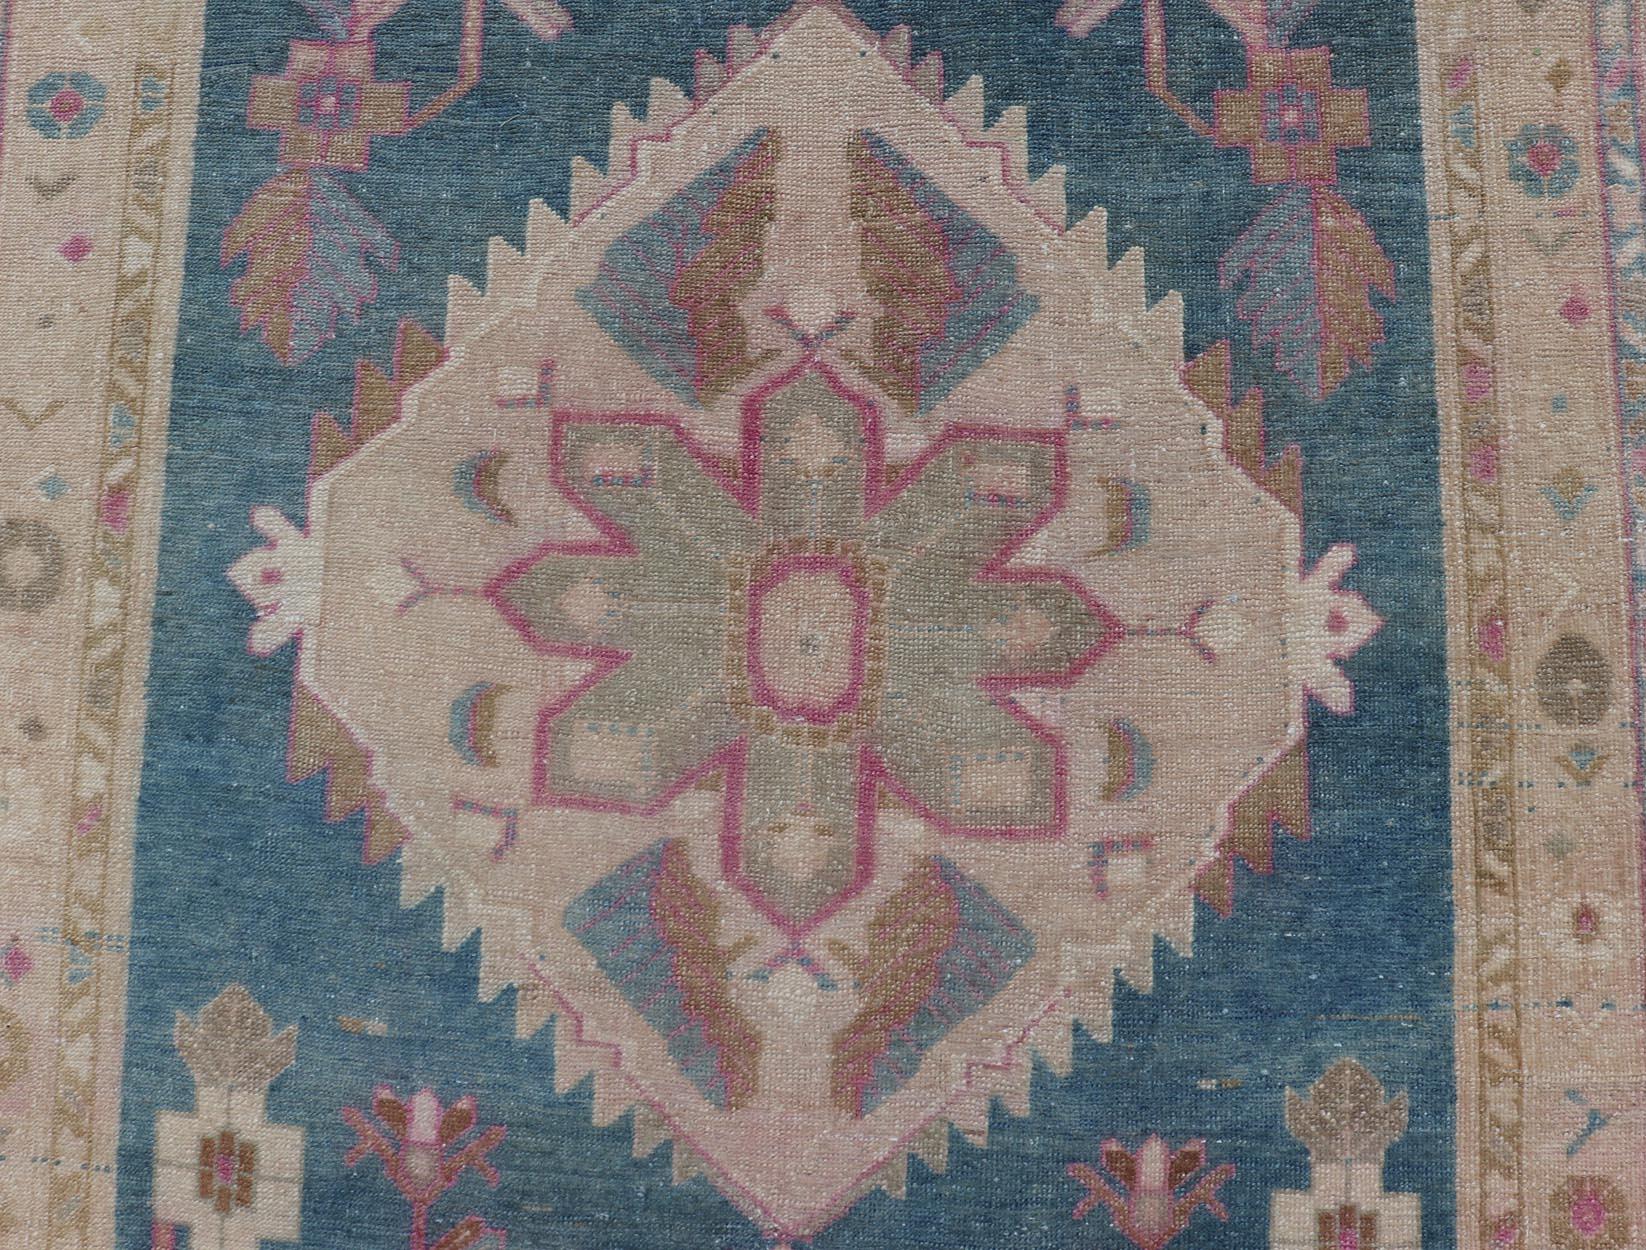 Measures: 3'9 x 10'2.
This antique Persian gallery Mahal rug has been hand-knotted in wool and features an all-over sub-geometric floral design rendered in blue, green, pink and neutral tones. A complementary, multi-tiered border encompasses the